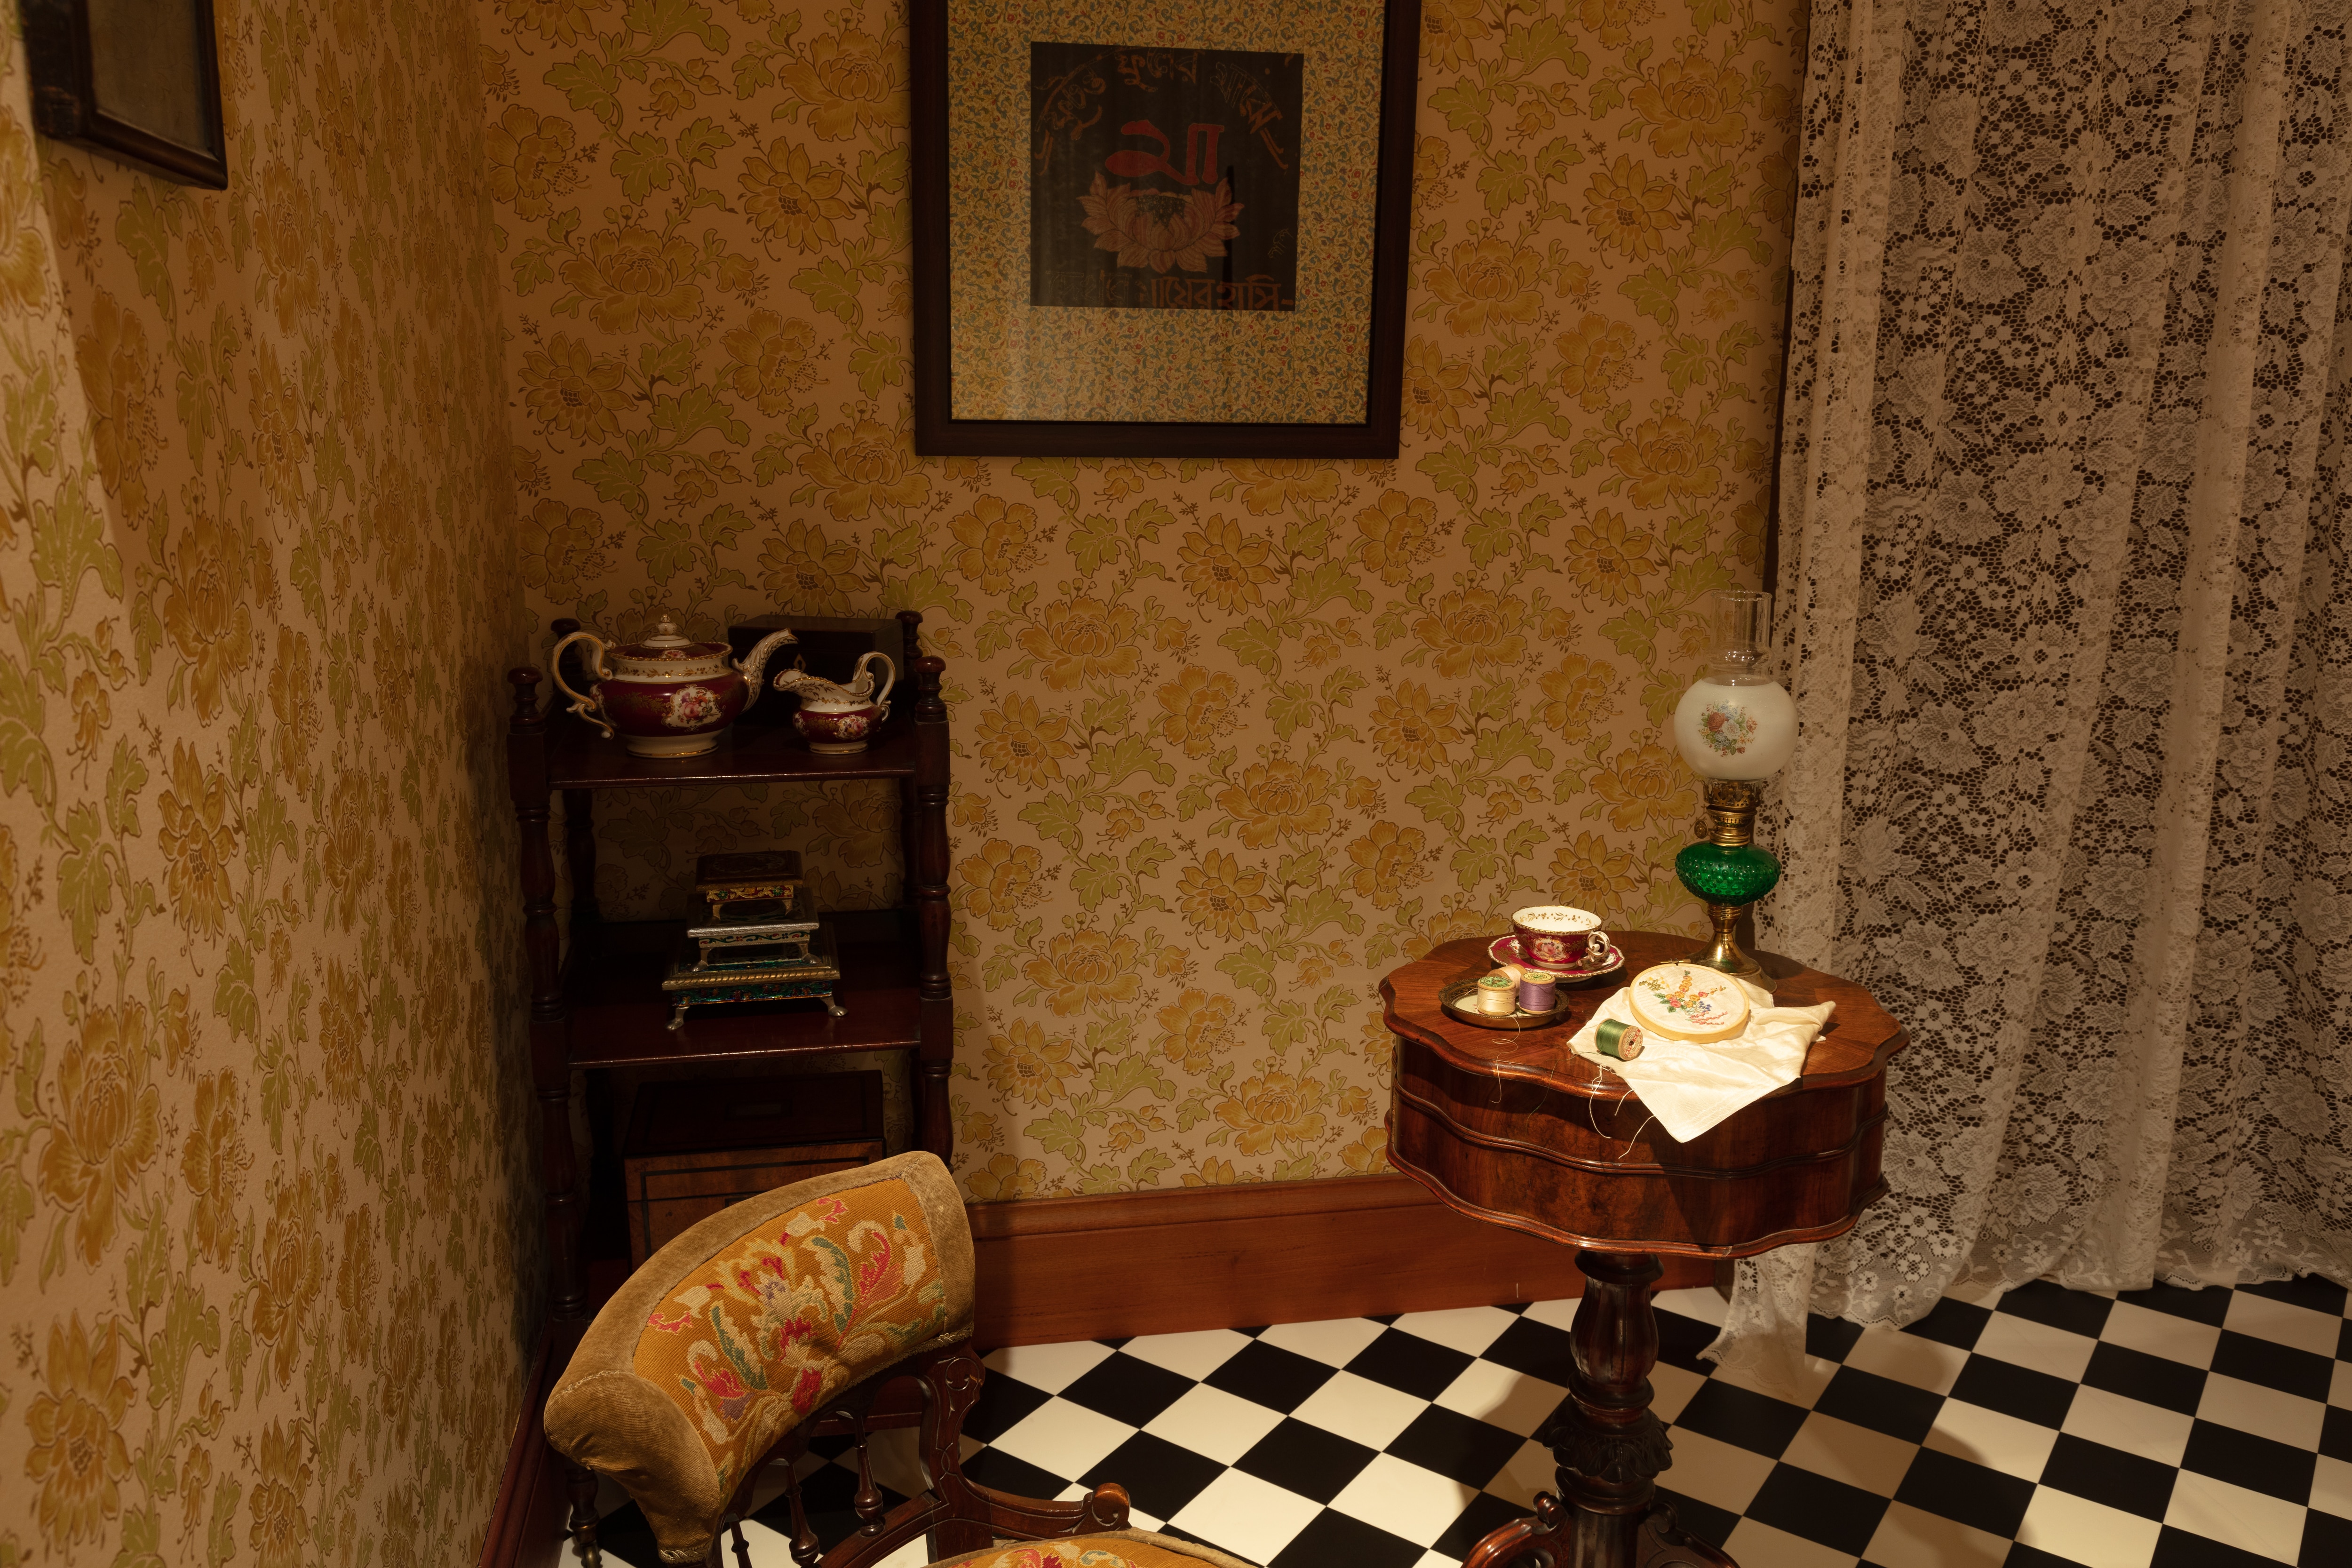 The Lindsay Family Sitting Room has been reimagined as the living quarters of a Bengali girl from Kolkata.